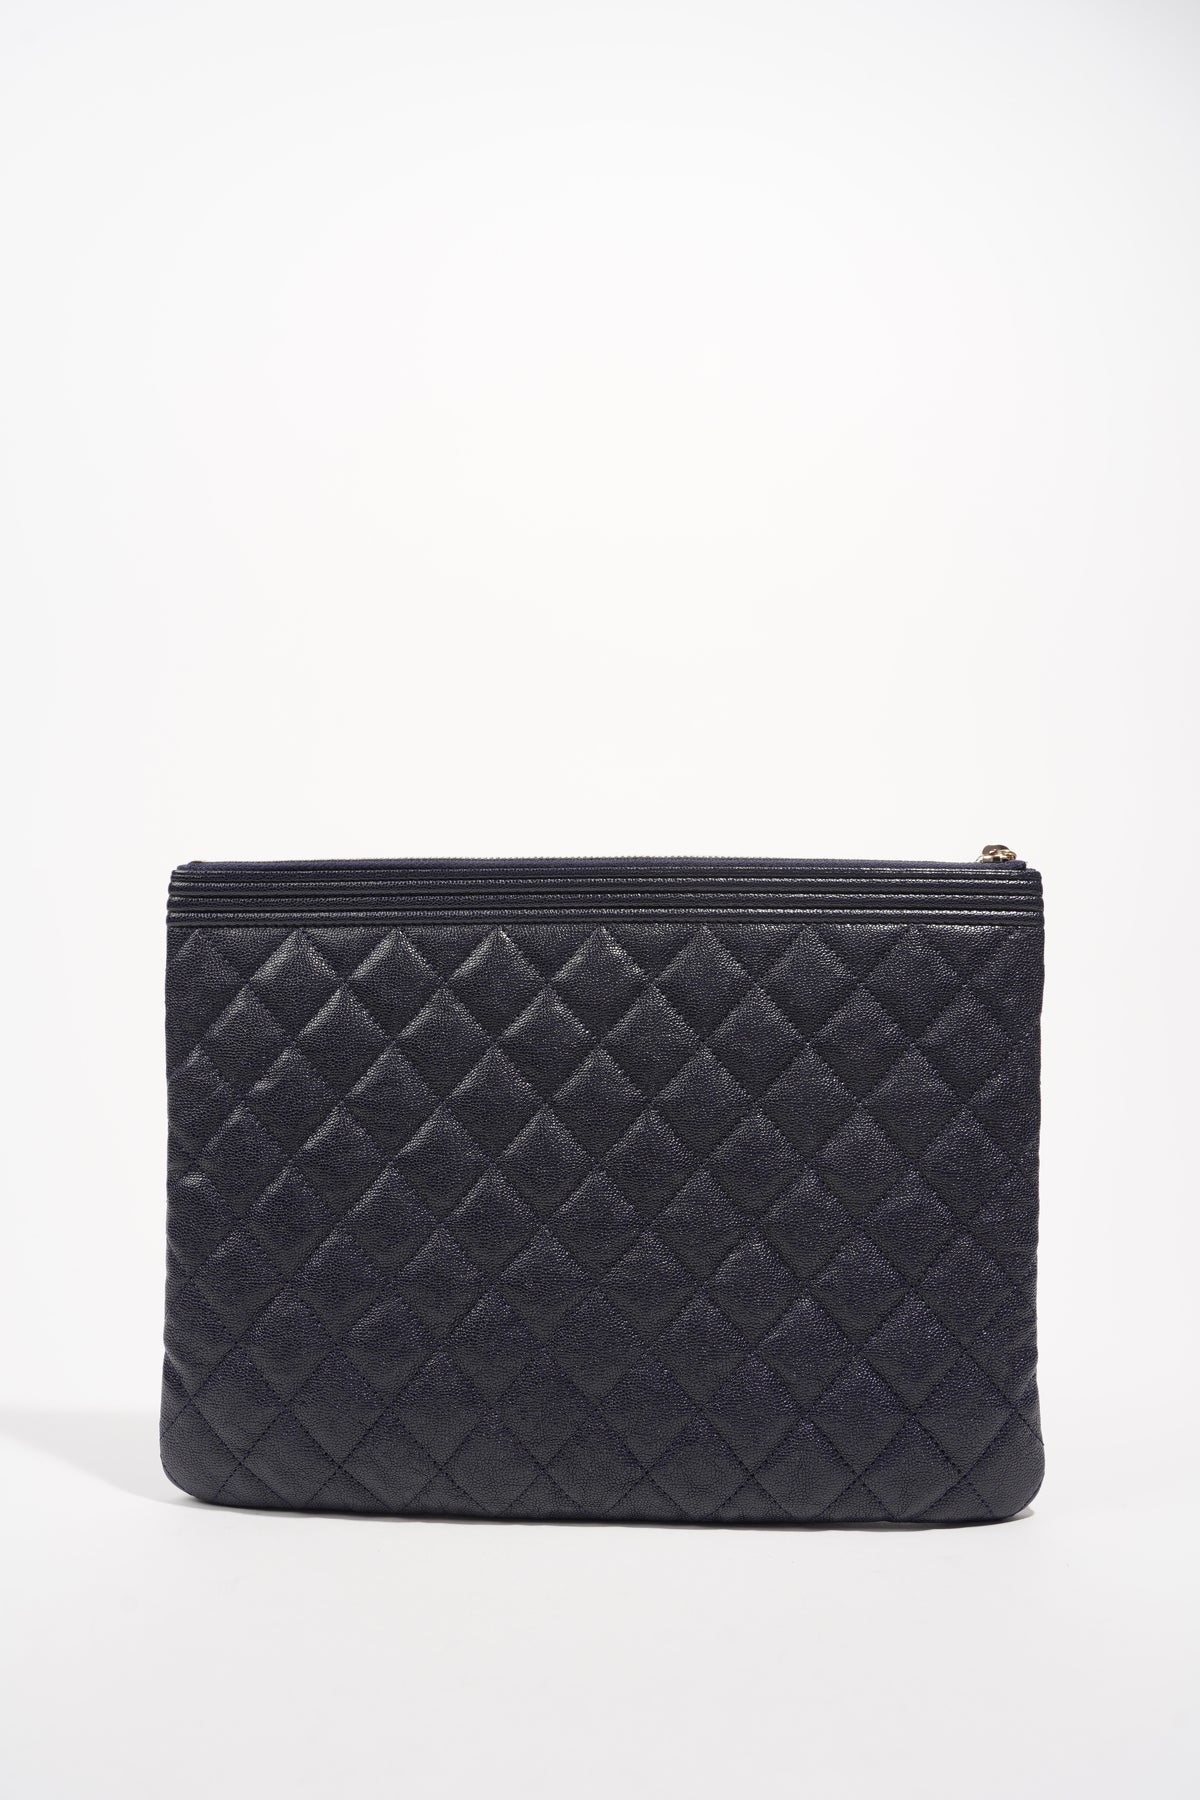 Chanel Boy Bag Black Lambskin Small – Luxe Collective